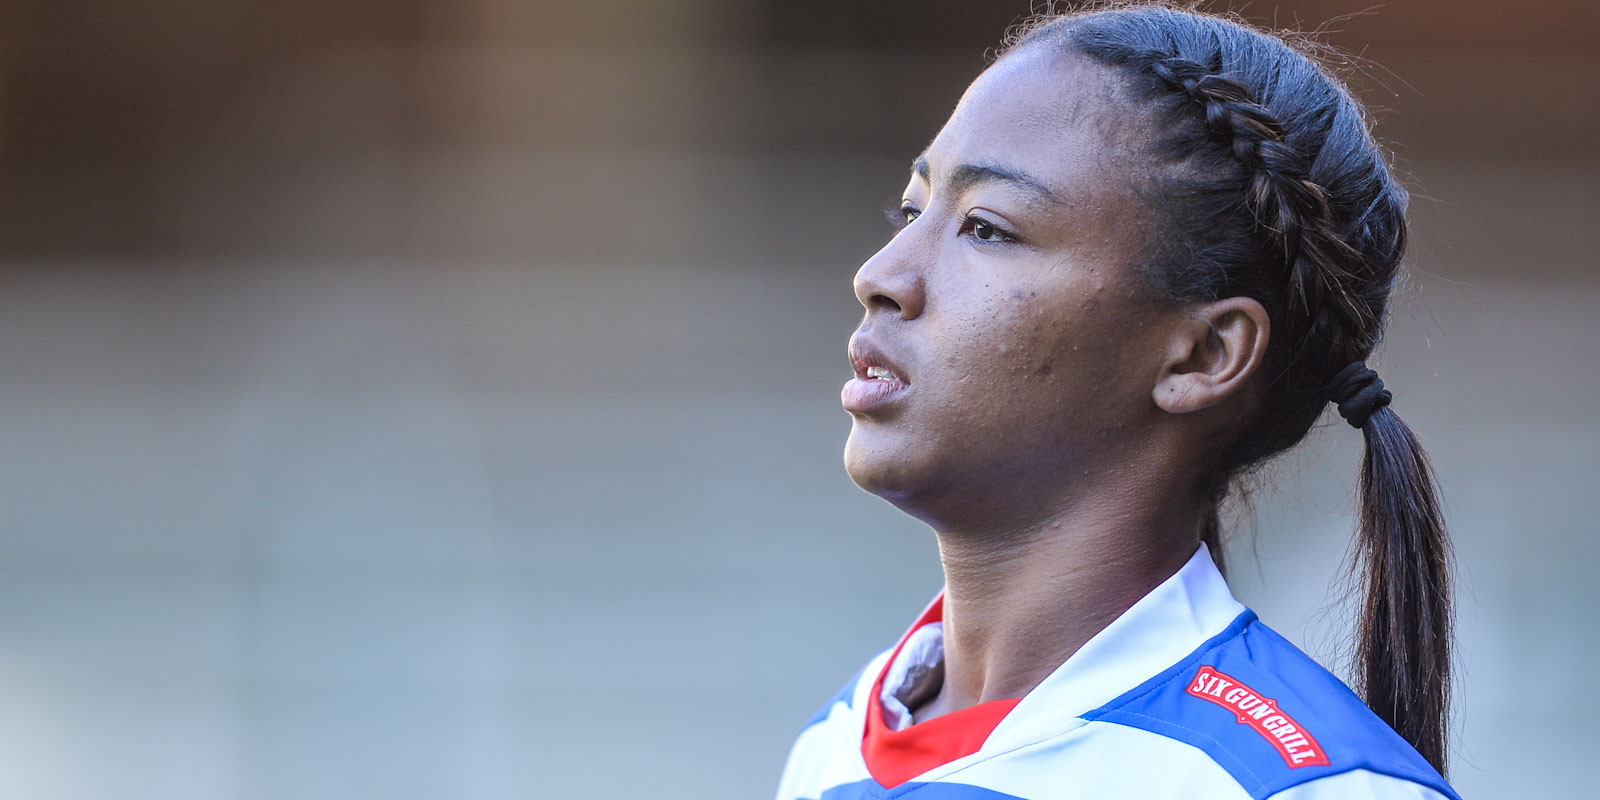 Alichia Arries scored two tries as DHL WP beat the Cell C Sharks by 10-0 in Durban.